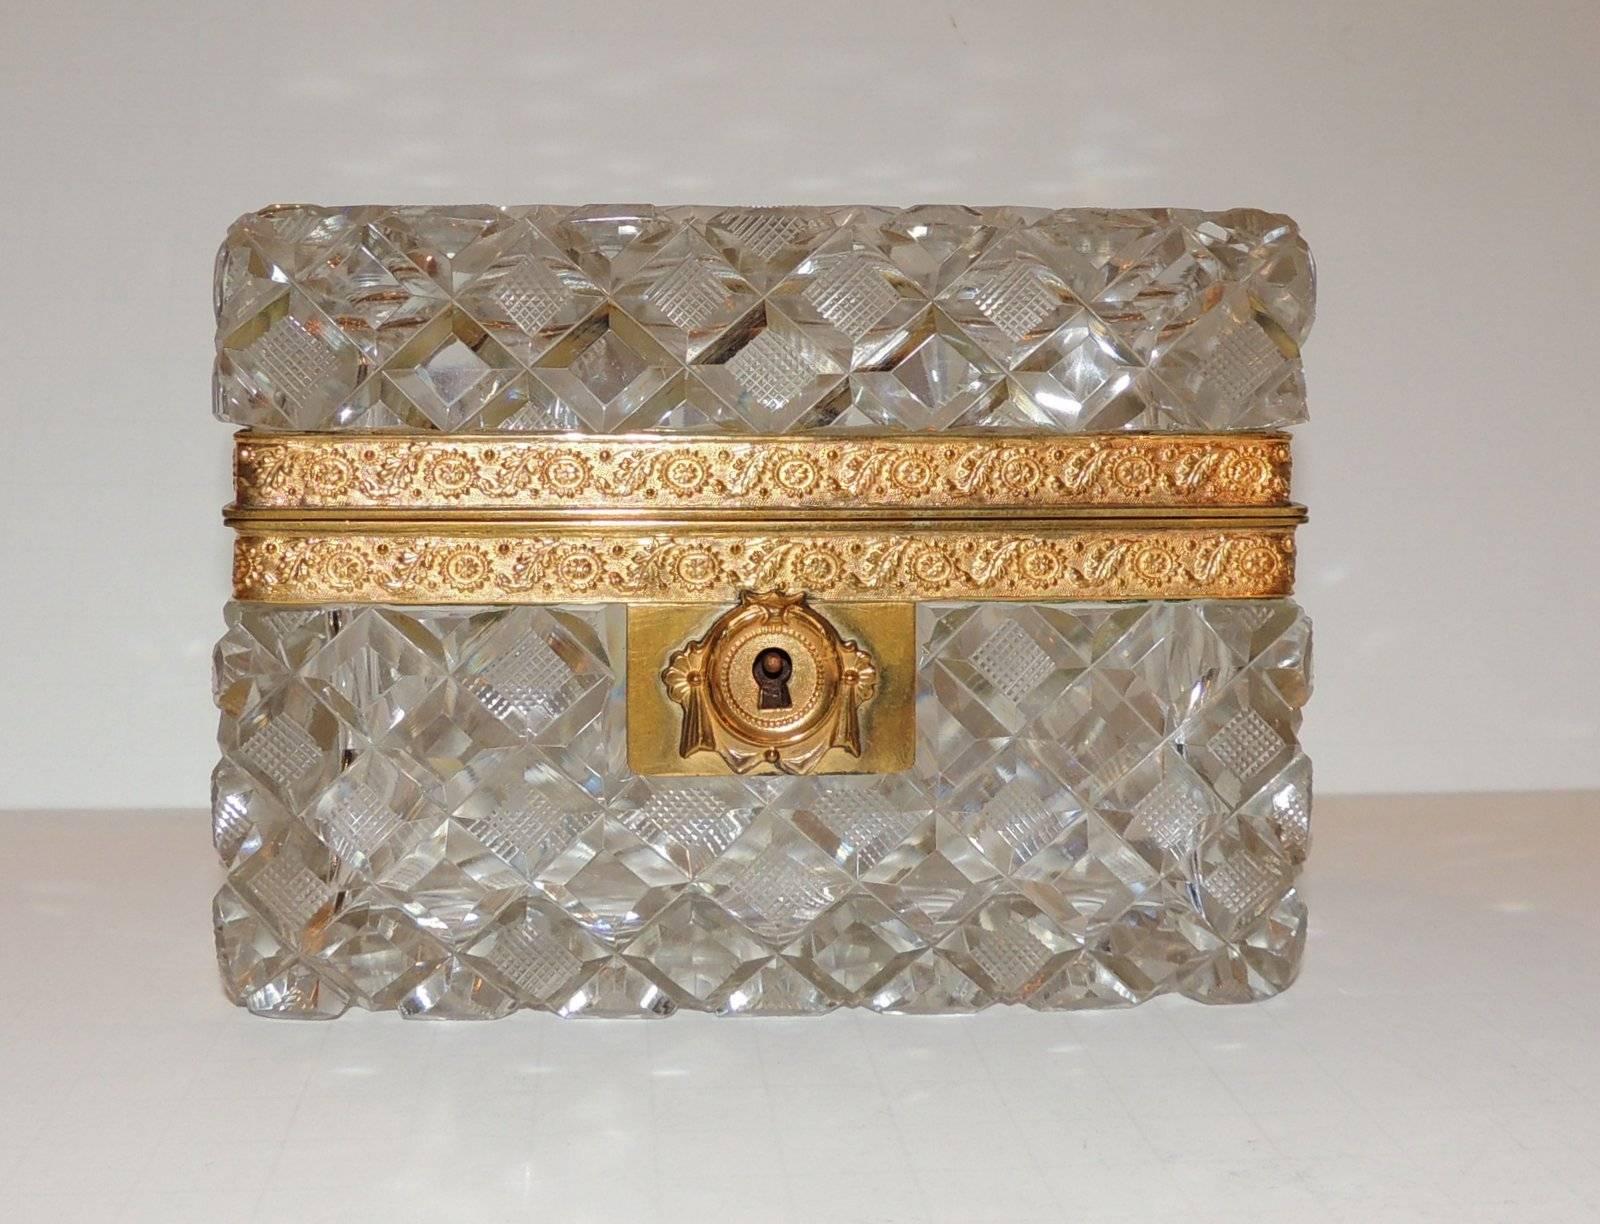 A beautiful cut and etched crystal within diamond pattern with engraved bronze ormolu mounting and draped keyhole.

Measures: 5" L x 4" H x 3.5" D.